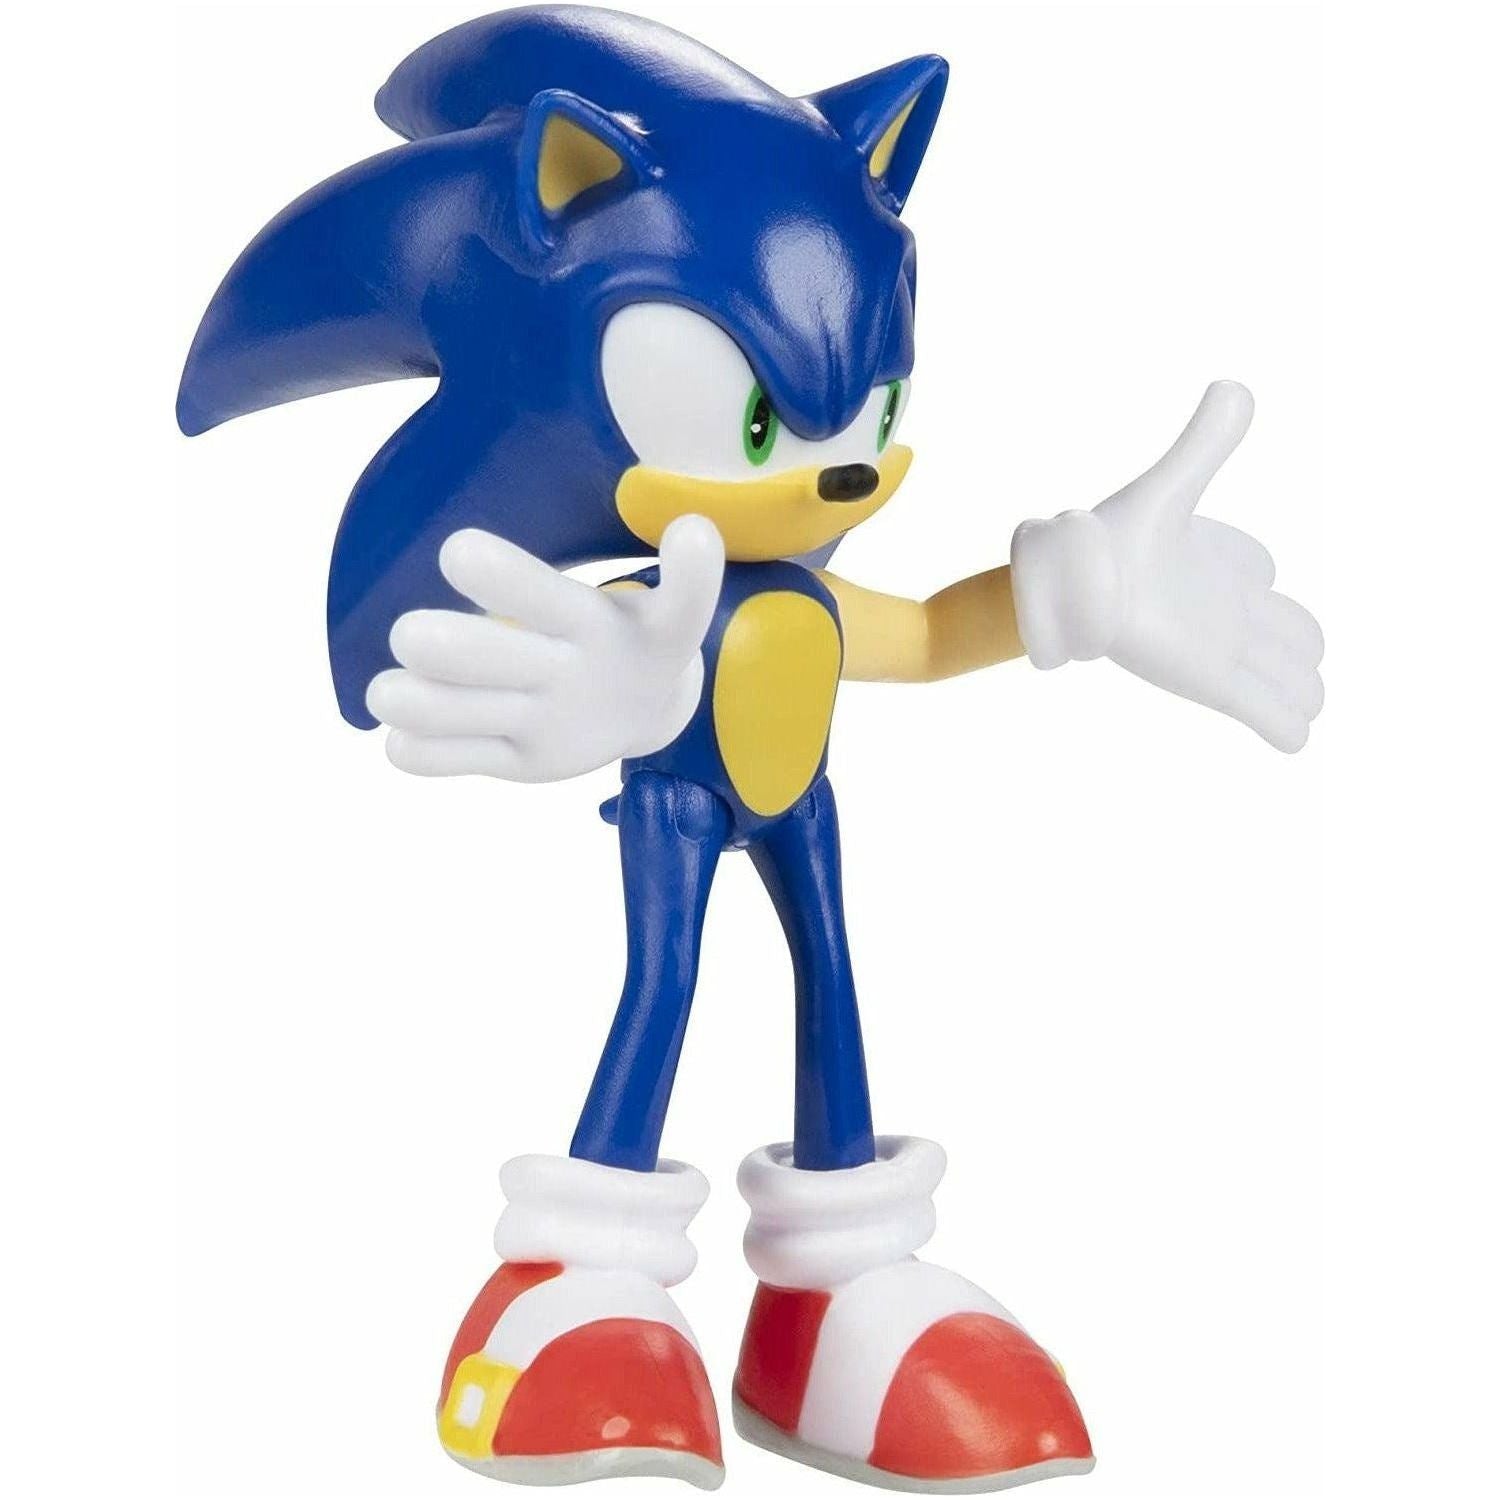 Sonic The Hedgehog 6.5 cm Action Figure Modern Sonic Collectible Toy - BumbleToys - 5-7 Years, 8-13 Years, Boys, OXE, Pre-Order, Sonic